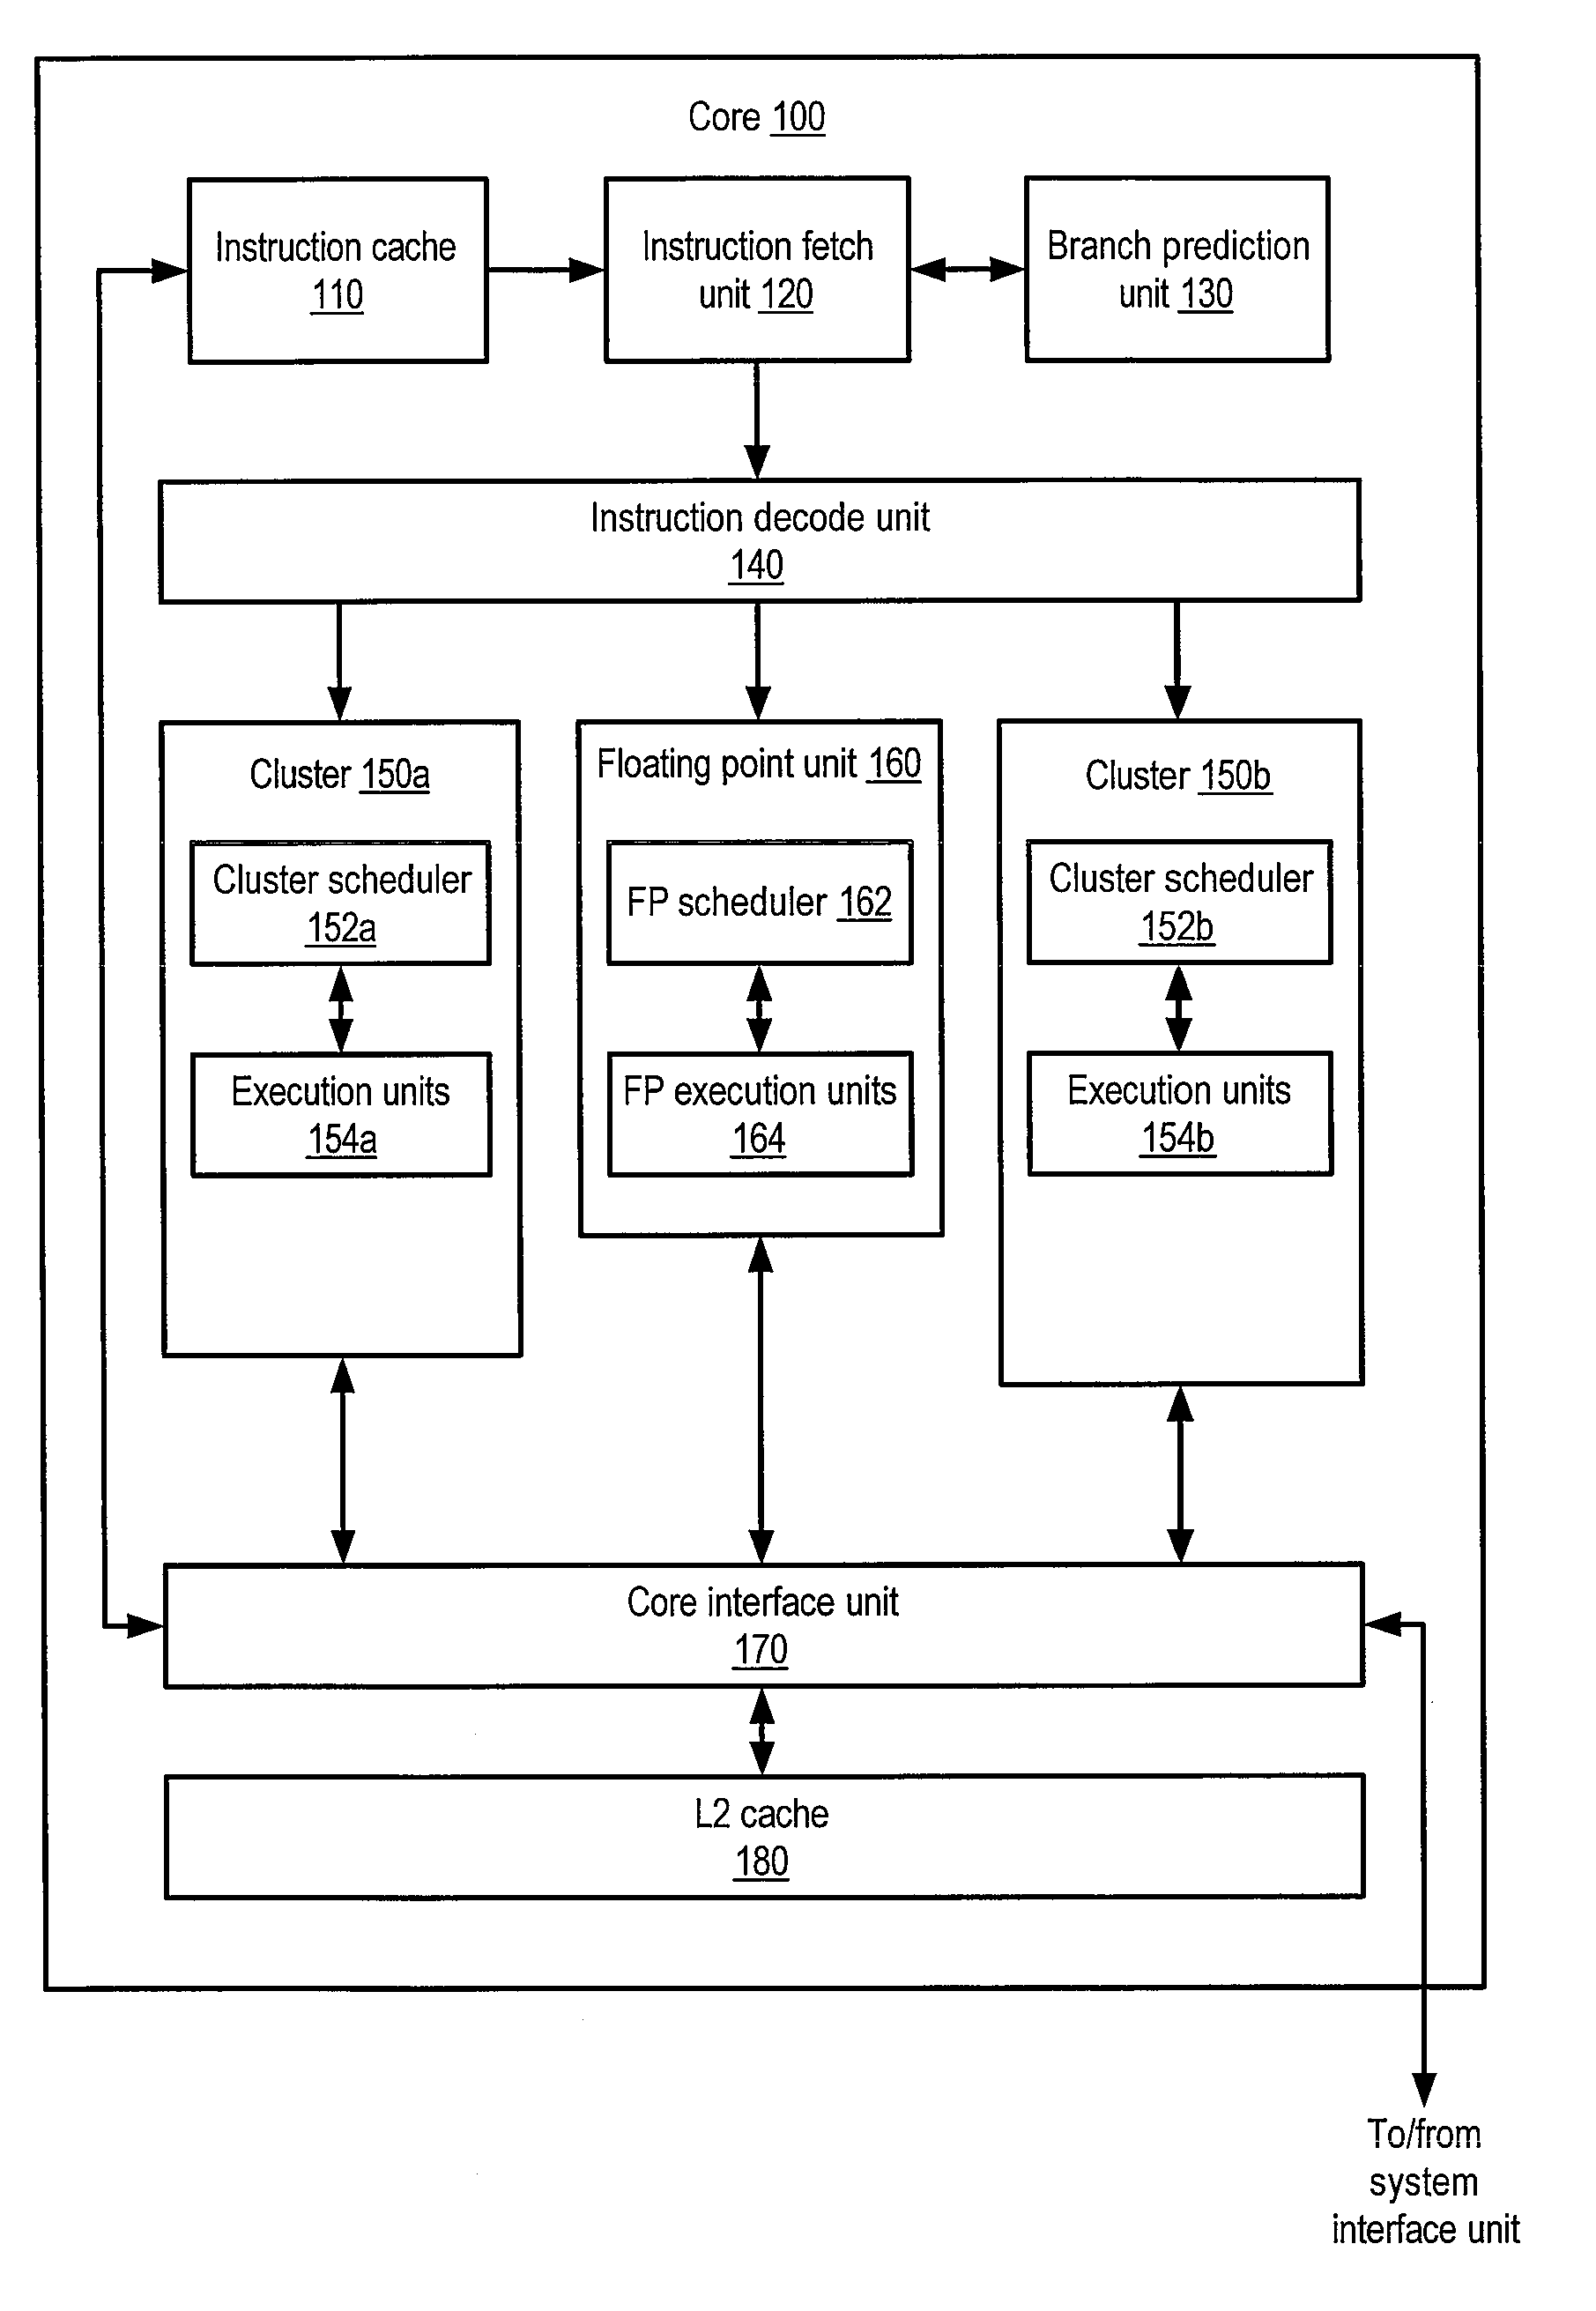 Multiple-core processor with hierarchical microcode store